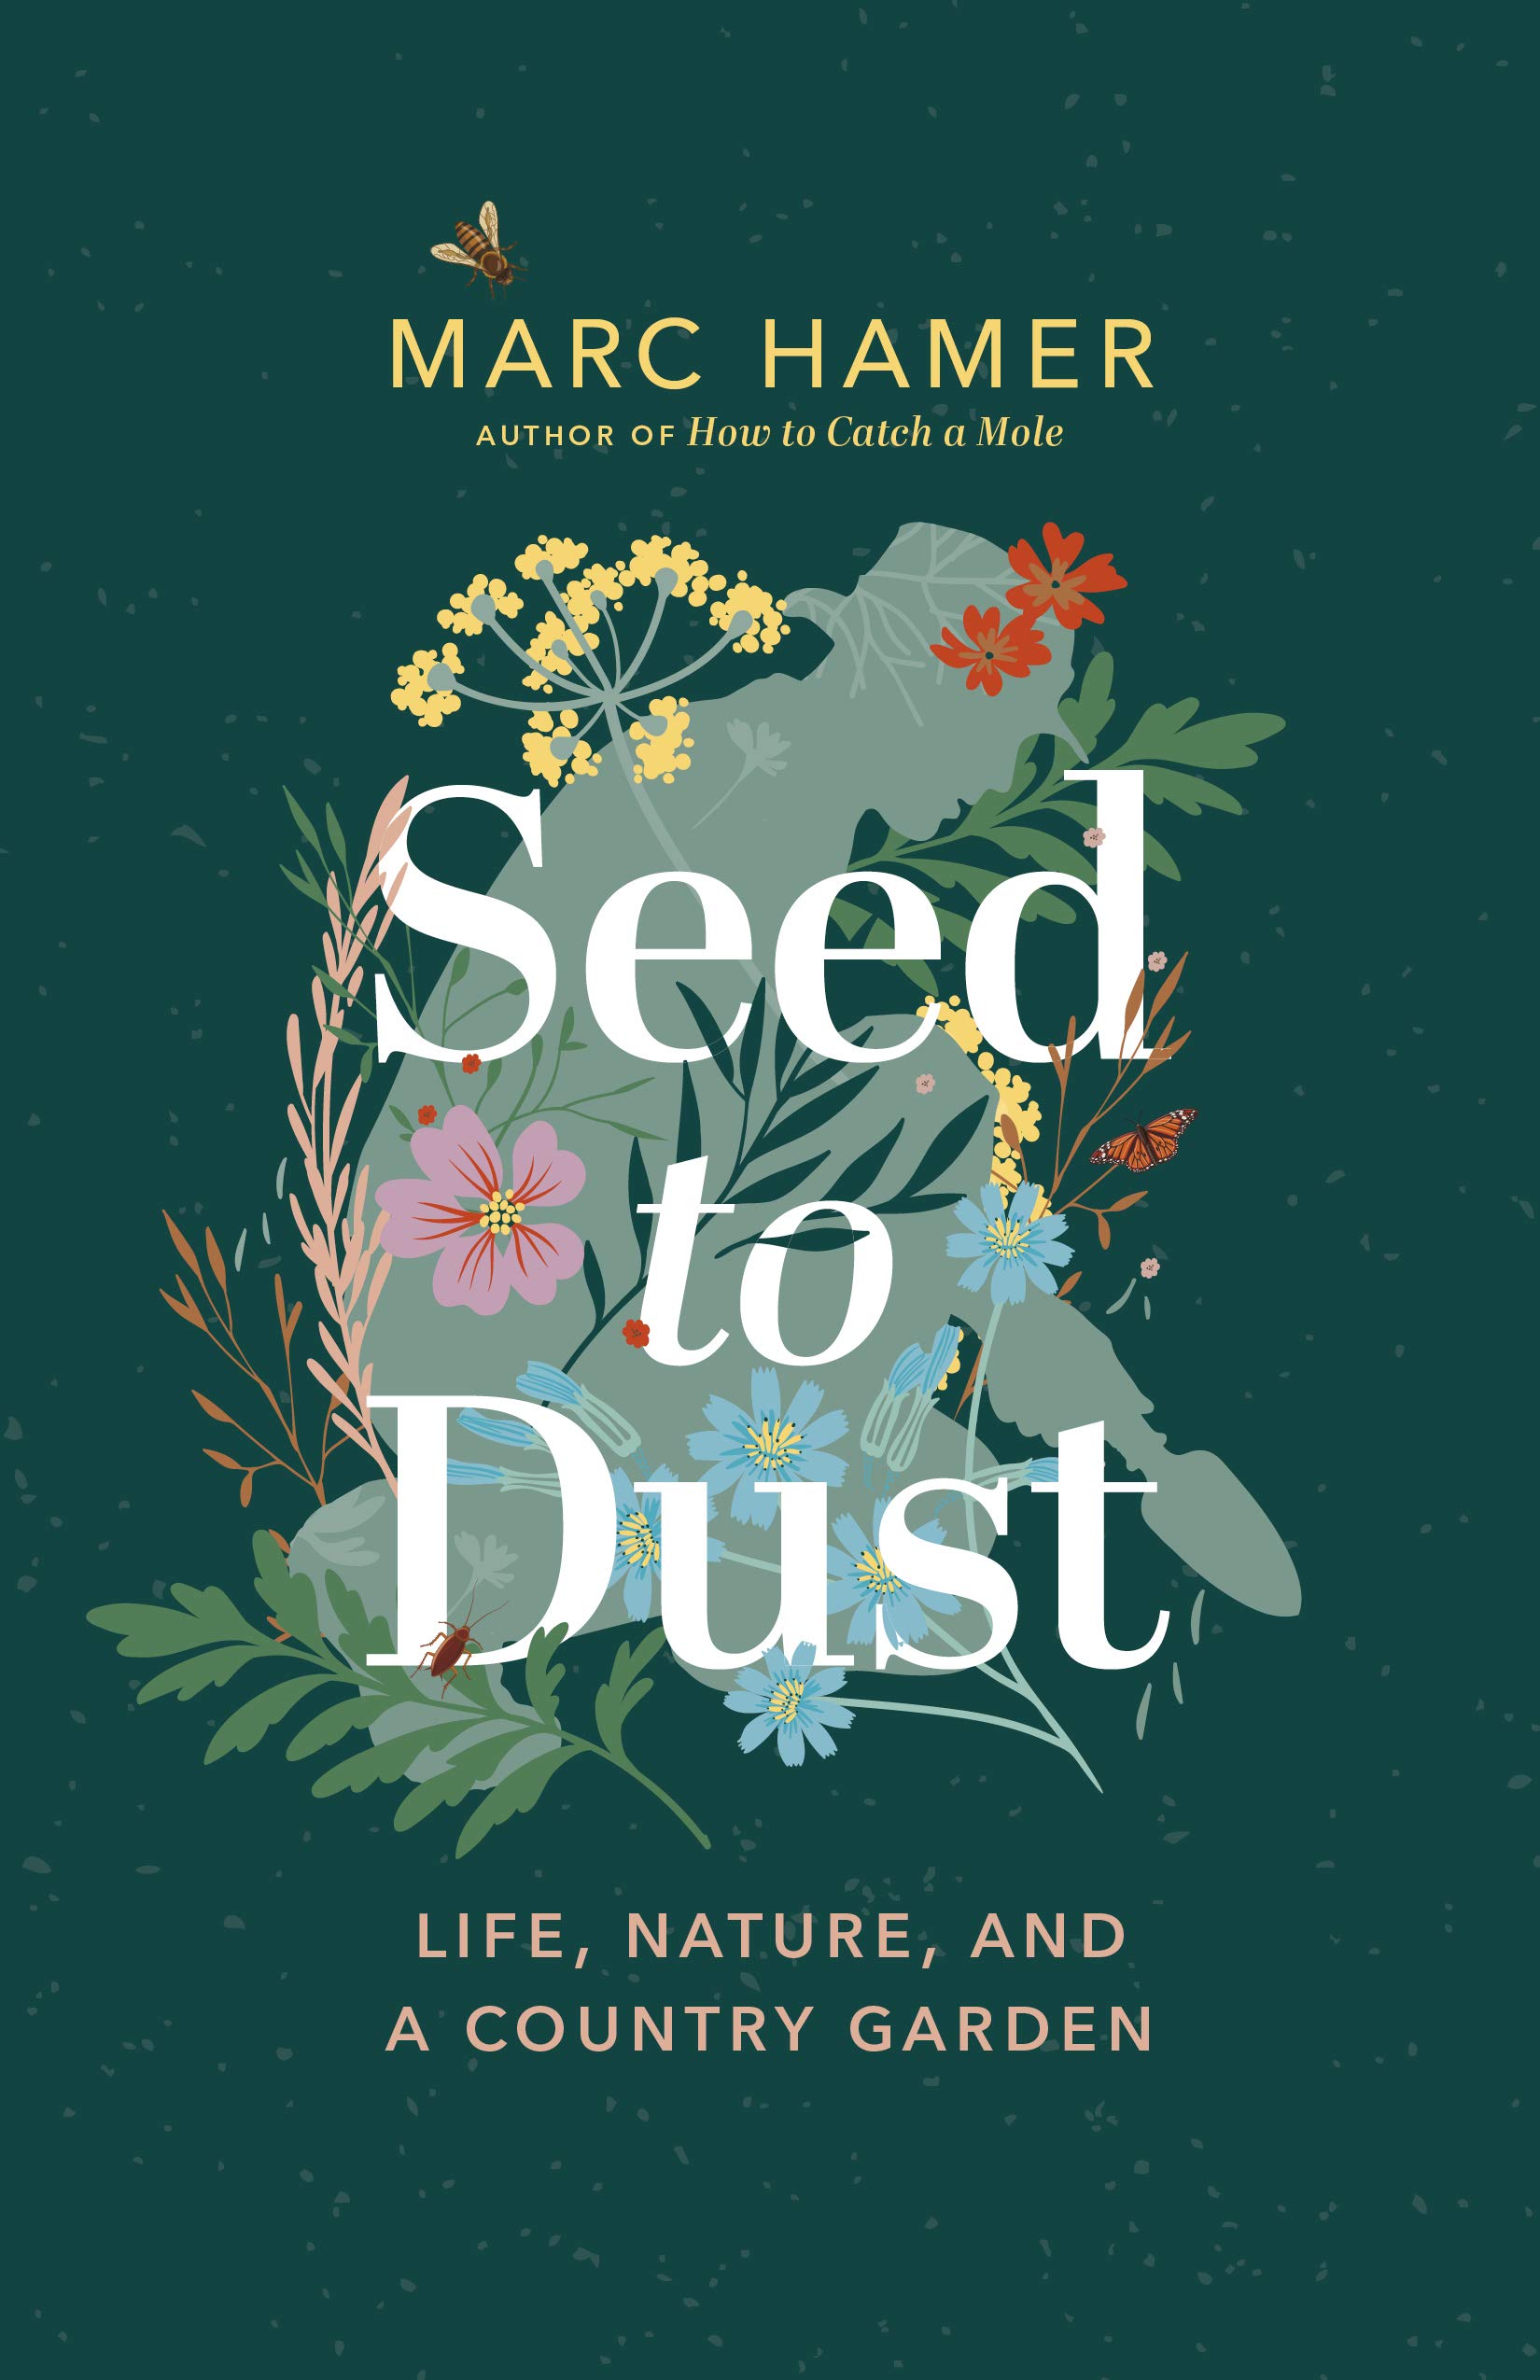 Image for "Seed to Dust"